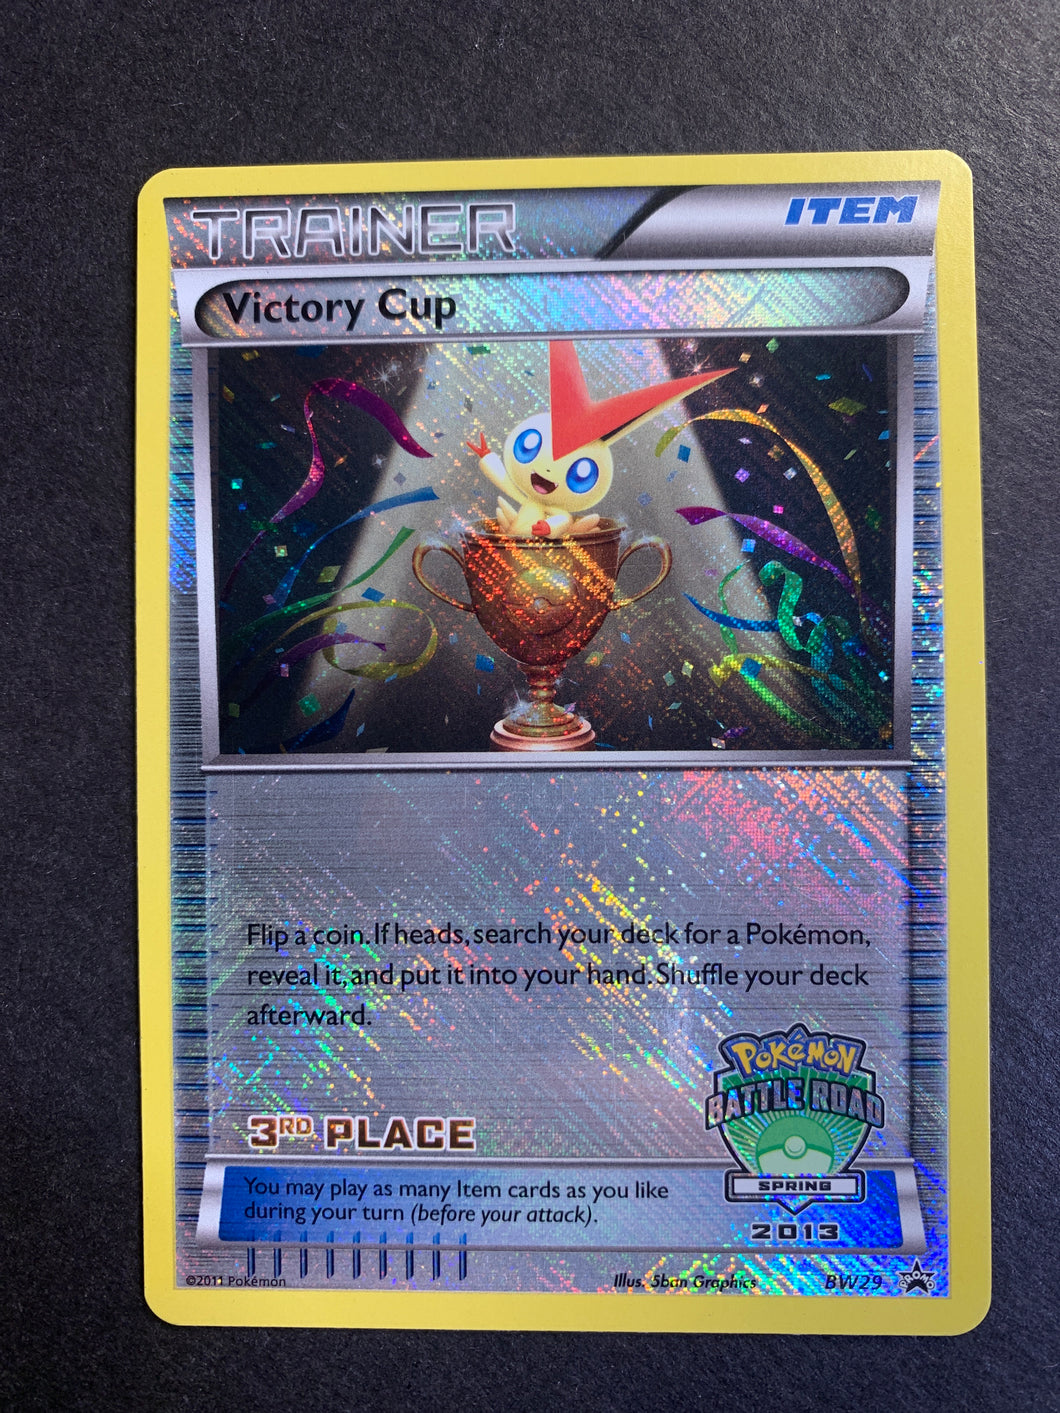 Pokemon Victory Cup 3rd Place - BW29 Holo Rare - 2013 Spring Battle Road Promo!